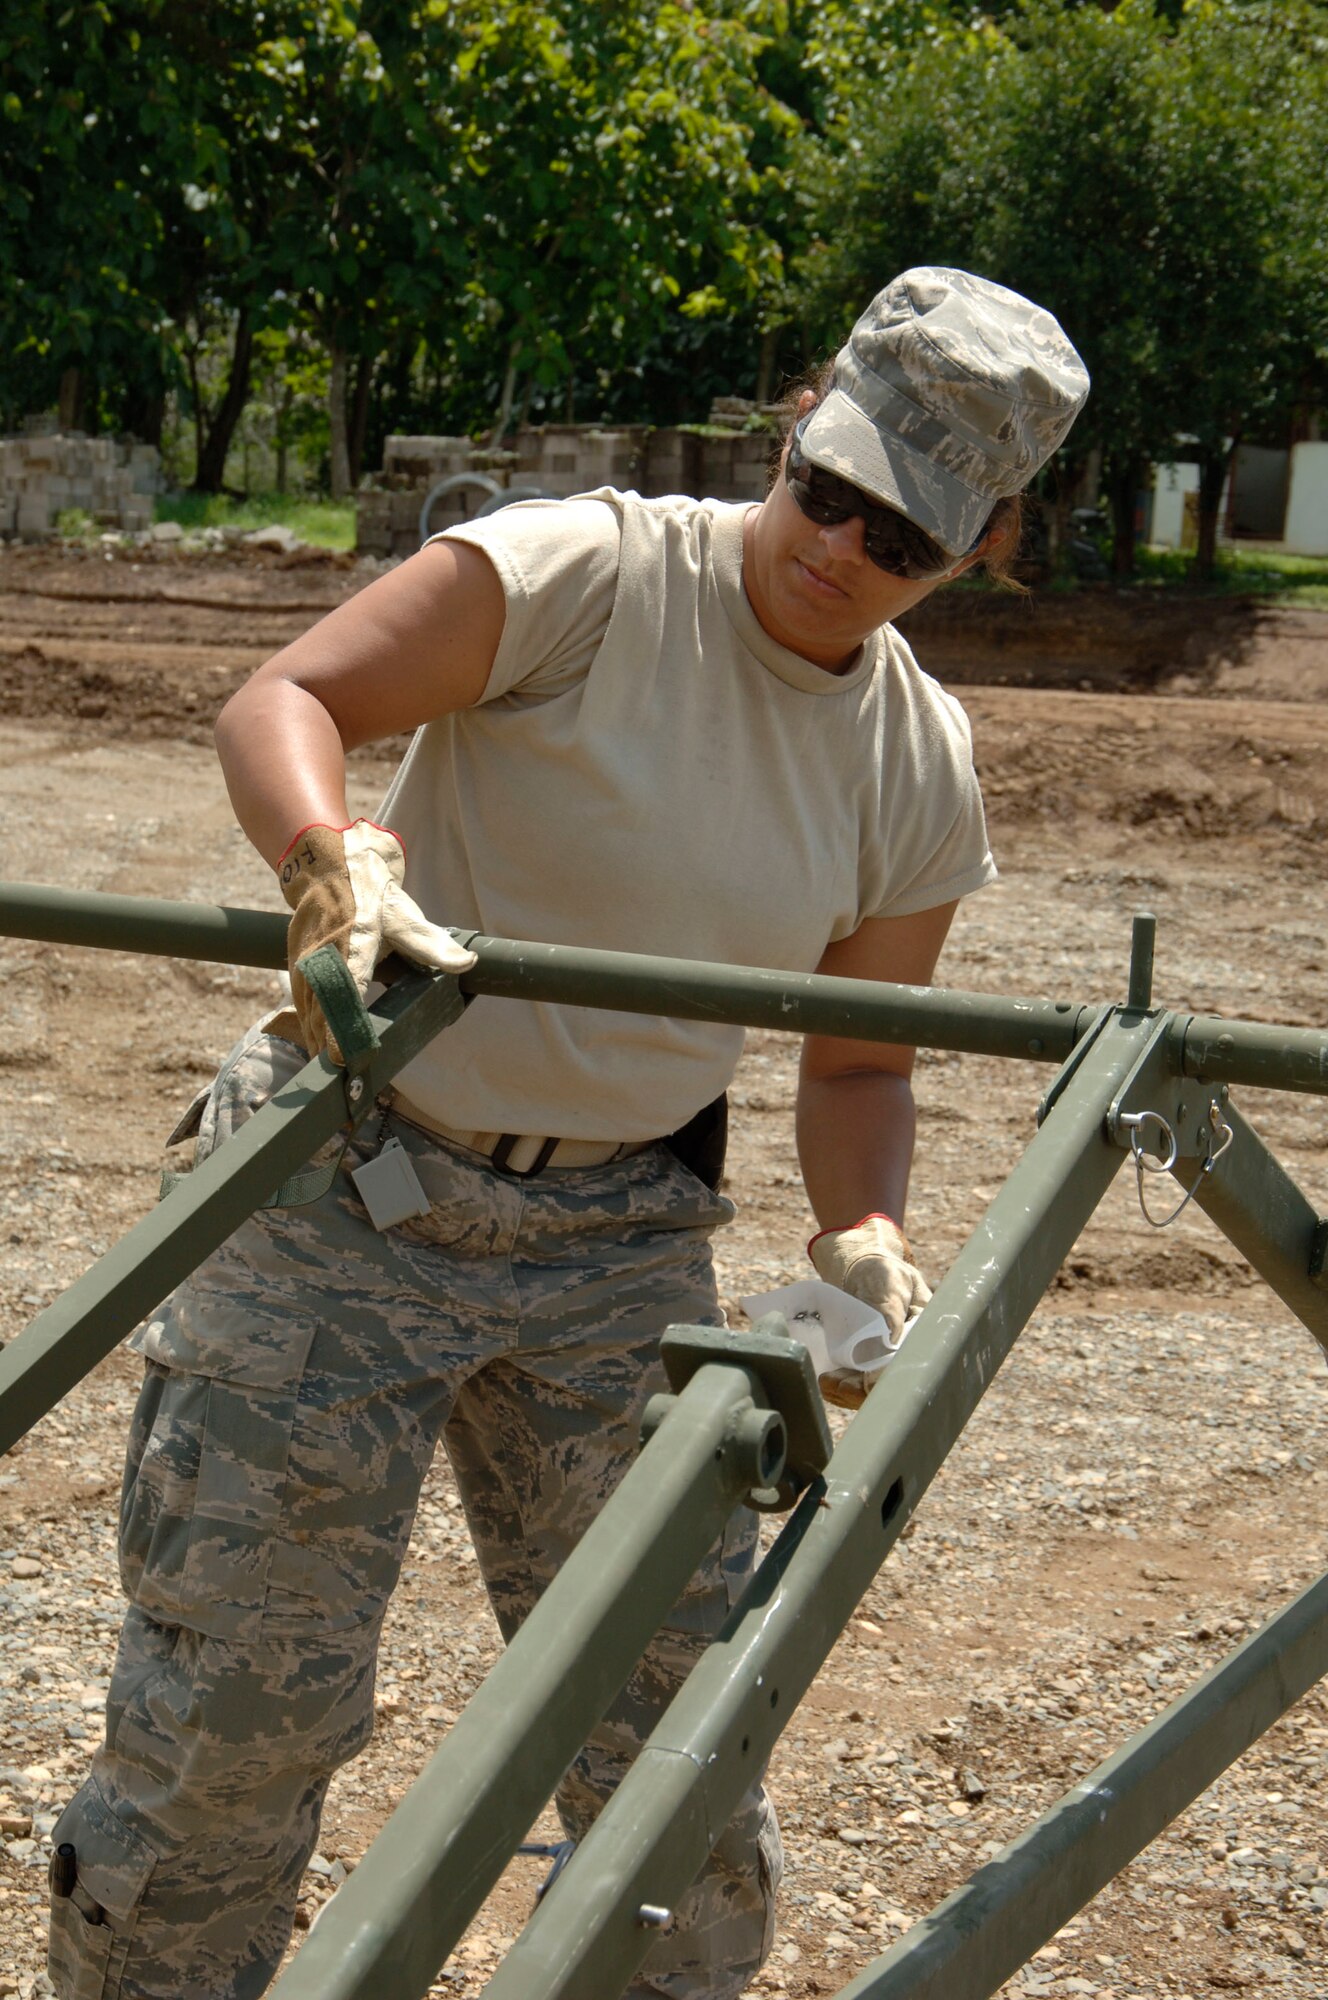 Master Sgt. Sol Rios, 567th RED HORSE Squadron, puts together the roof of the dining tent at the temporary encampment that will house more than 250 Airmen, Soldiers, and Marines for New Horizons Panama 2010. (U.S. Air Force photo/Tech. Sgt. Eric Petosky)